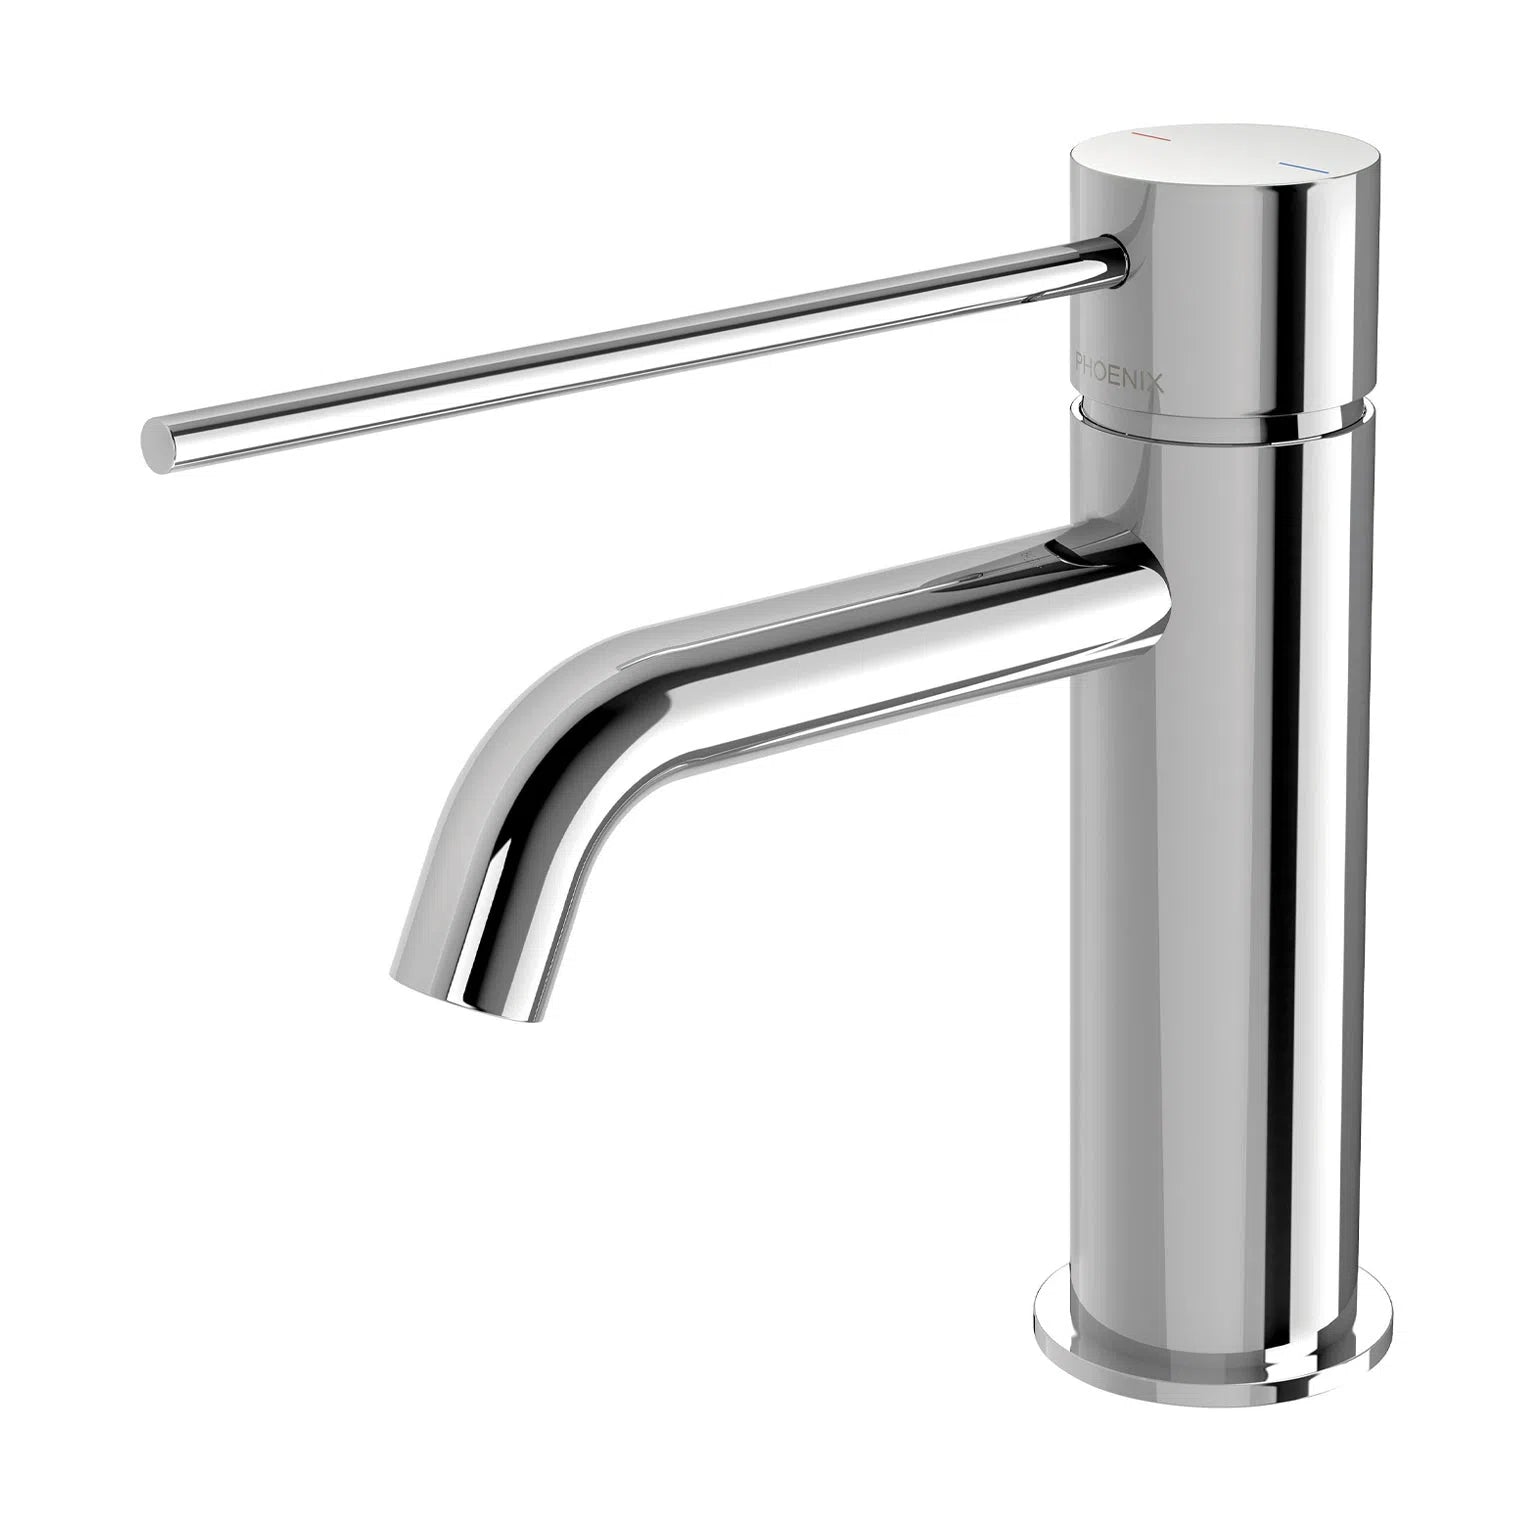 Phoenix Vivid Slimline Basin Mixer Curved Outlet with Extended Lever